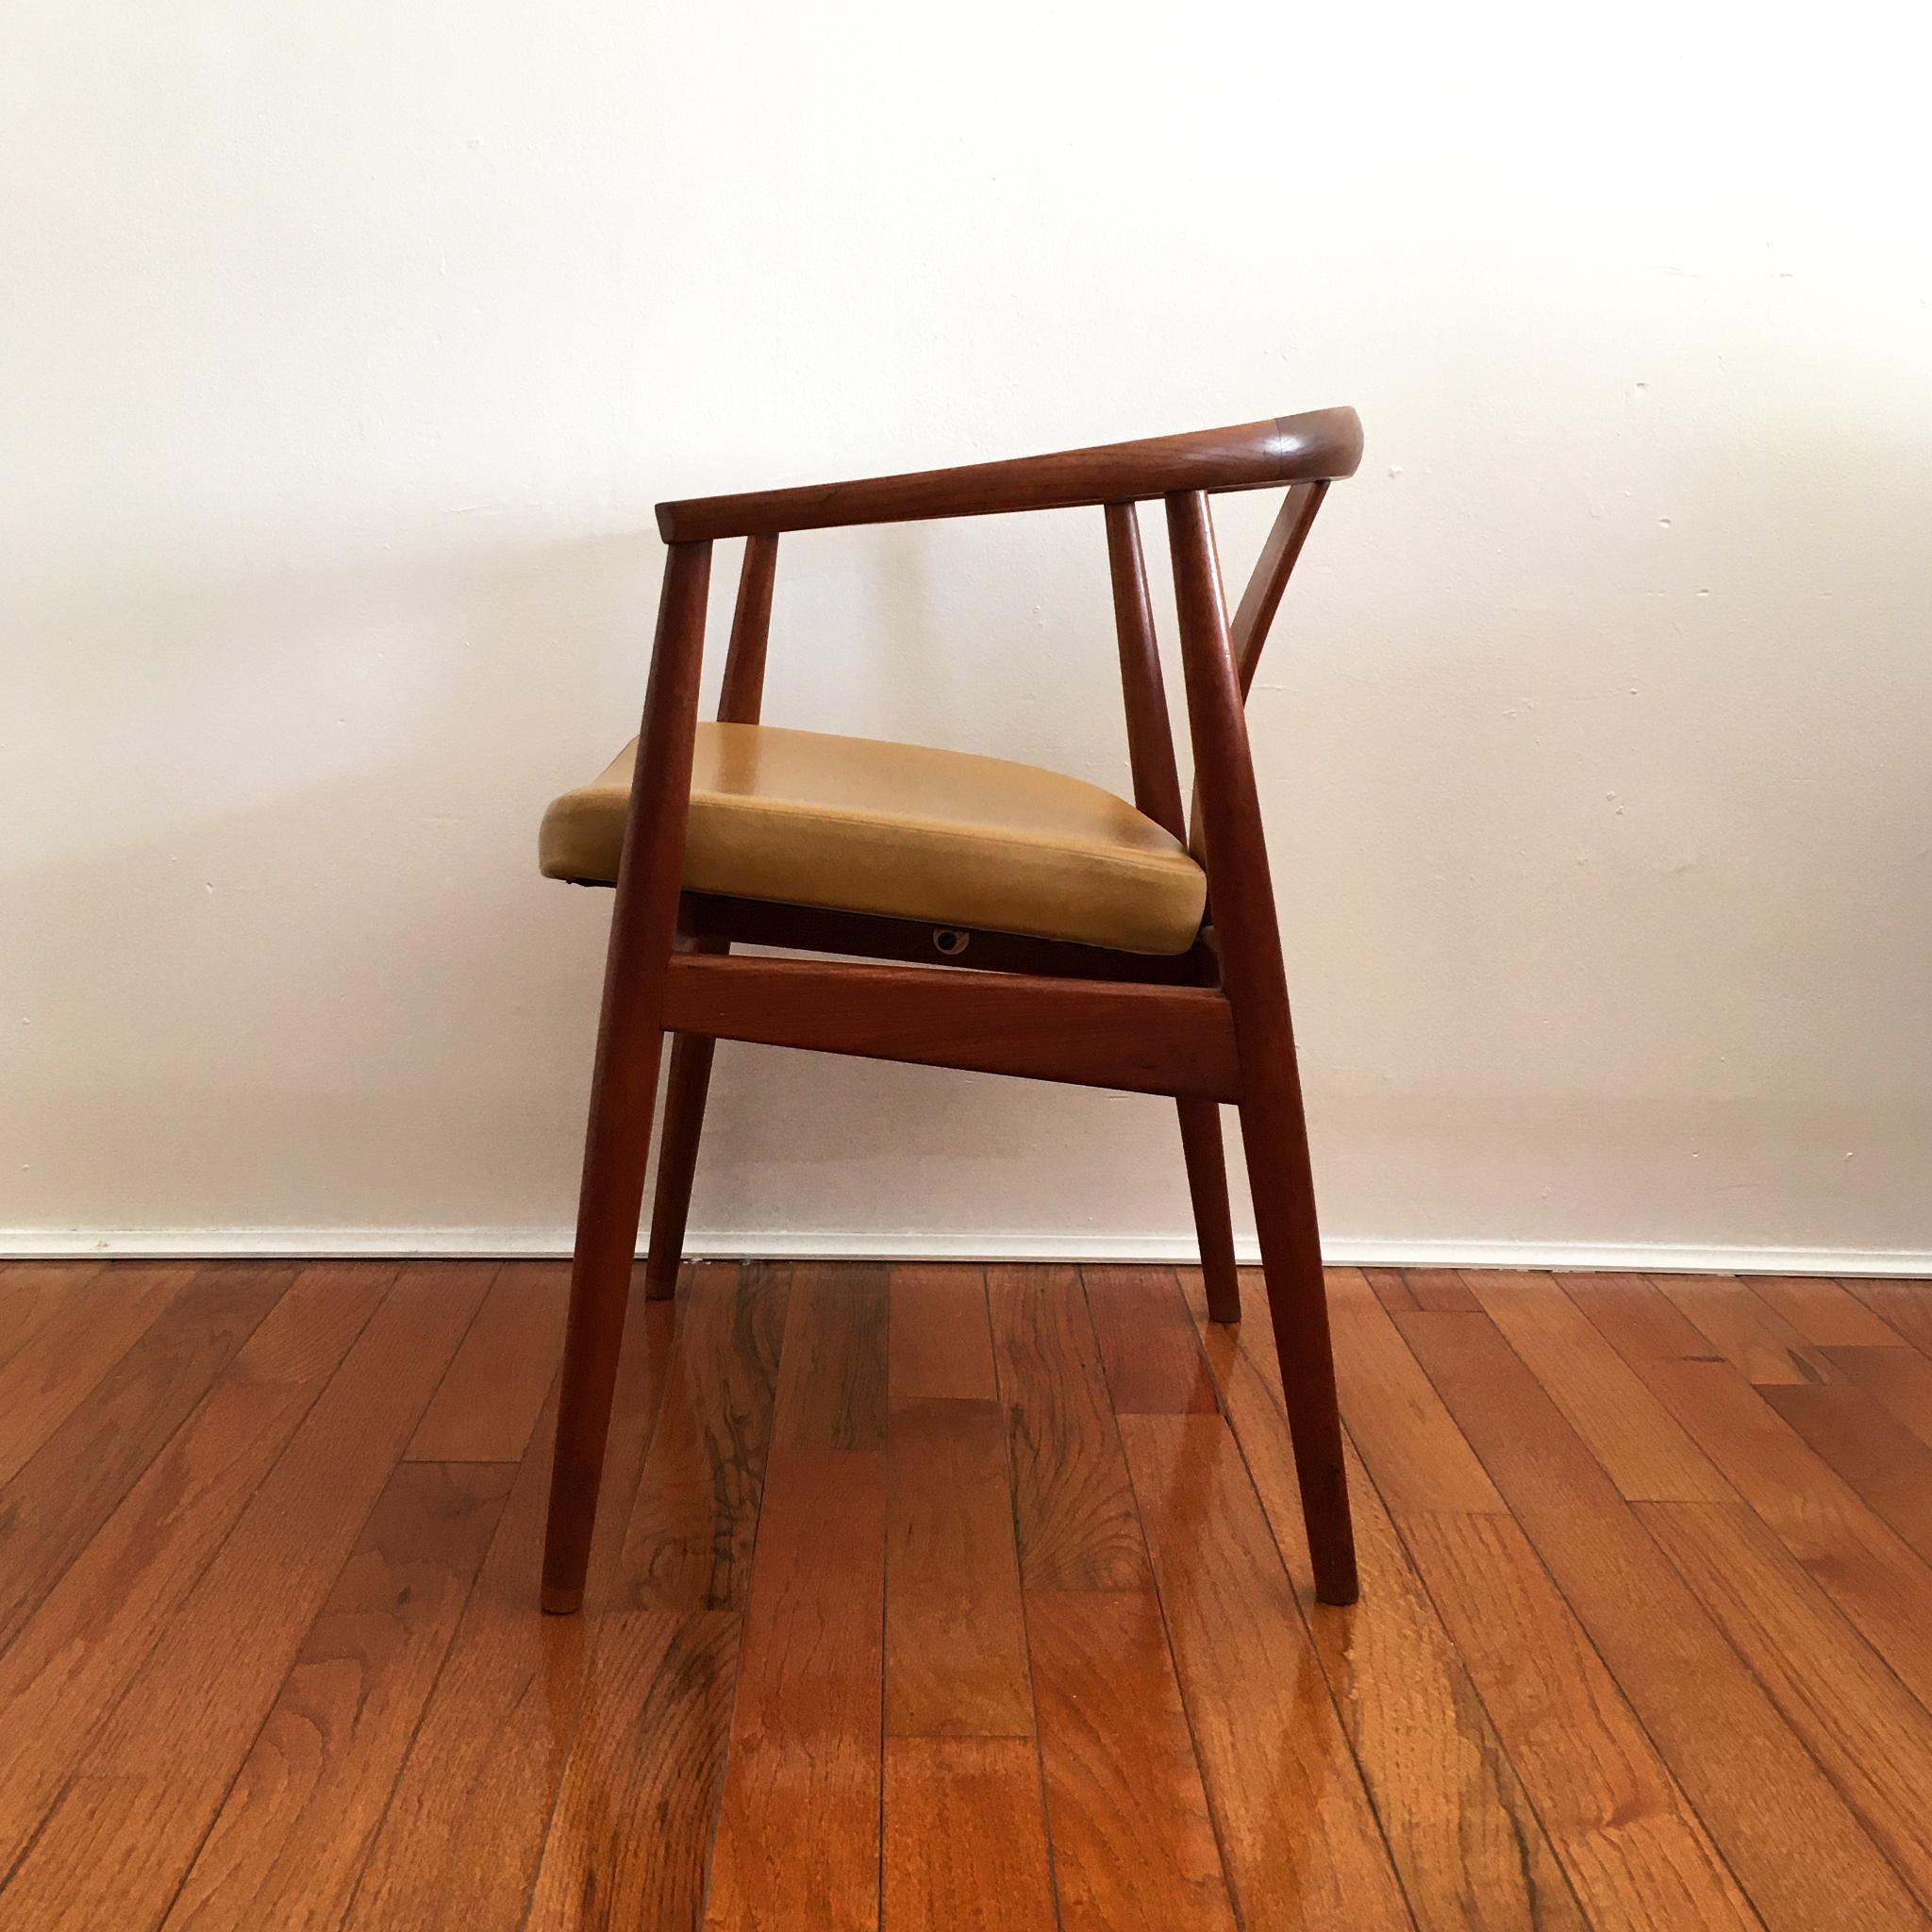 Carved Rare Tove & Edvard Kindt-Larsen Danish Teak Chair with Yellow Ochre Leather Seat